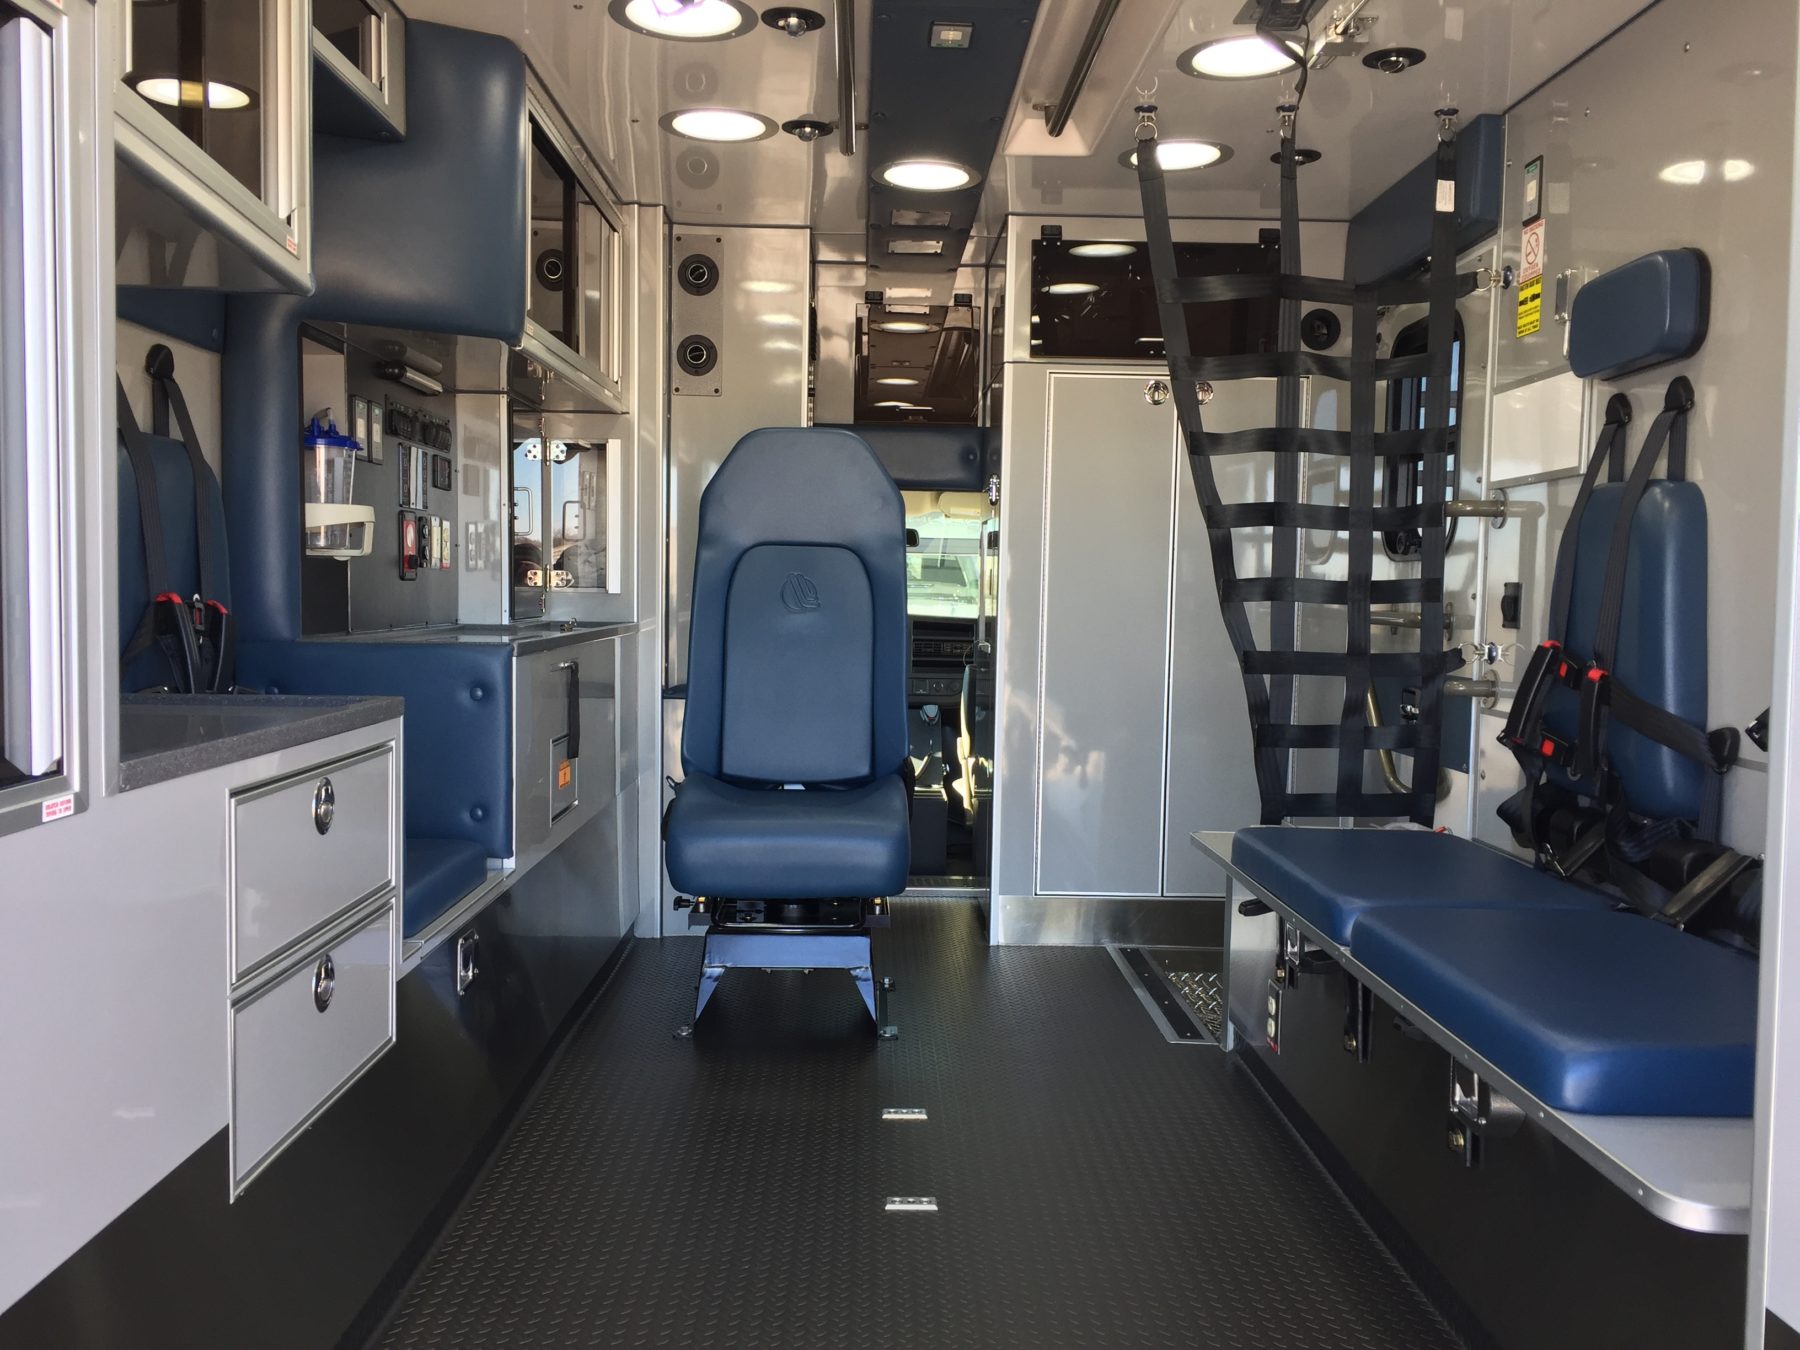 2018 Chevrolet G4500 Type 3 Ambulance For Sale – Picture 2